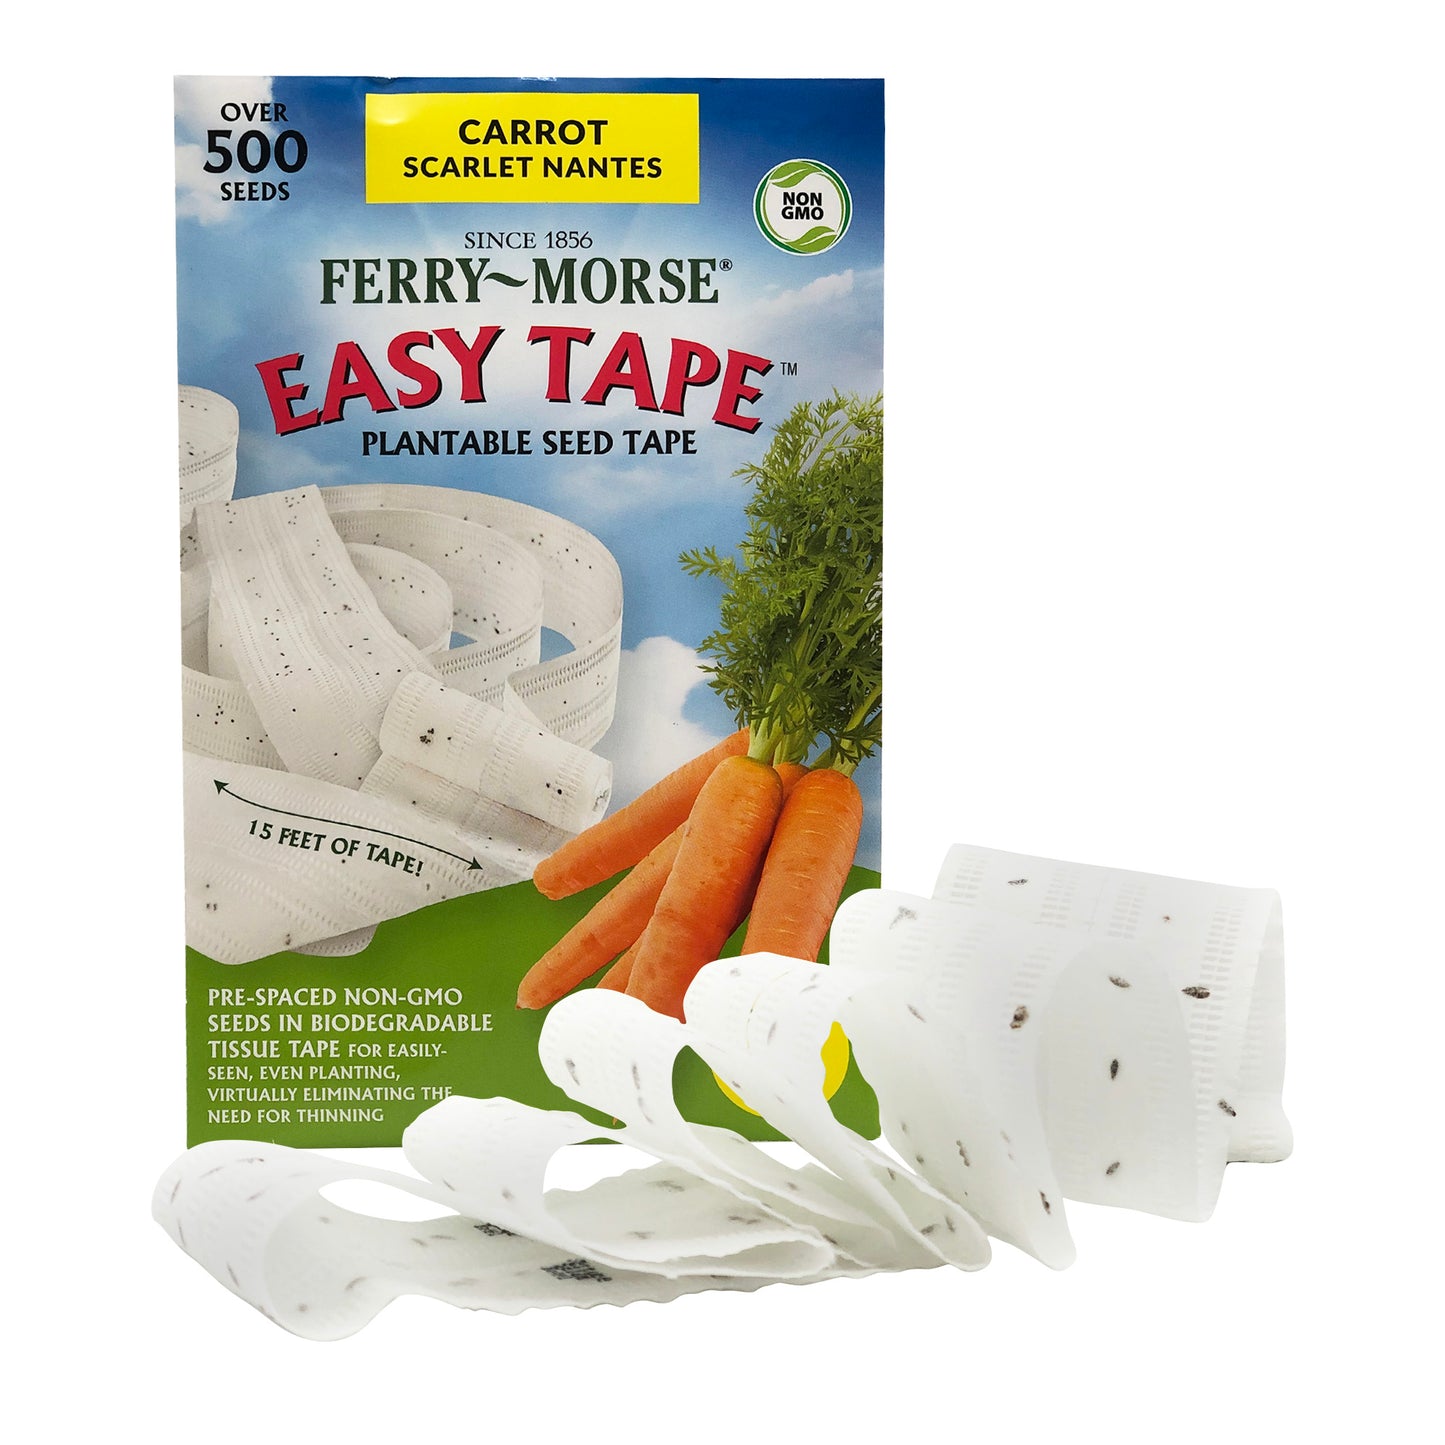 Scarlet Nantes Carrots Coreless Seeds Tape in retail packaging perched in front of biodegradable tissue tape on display.